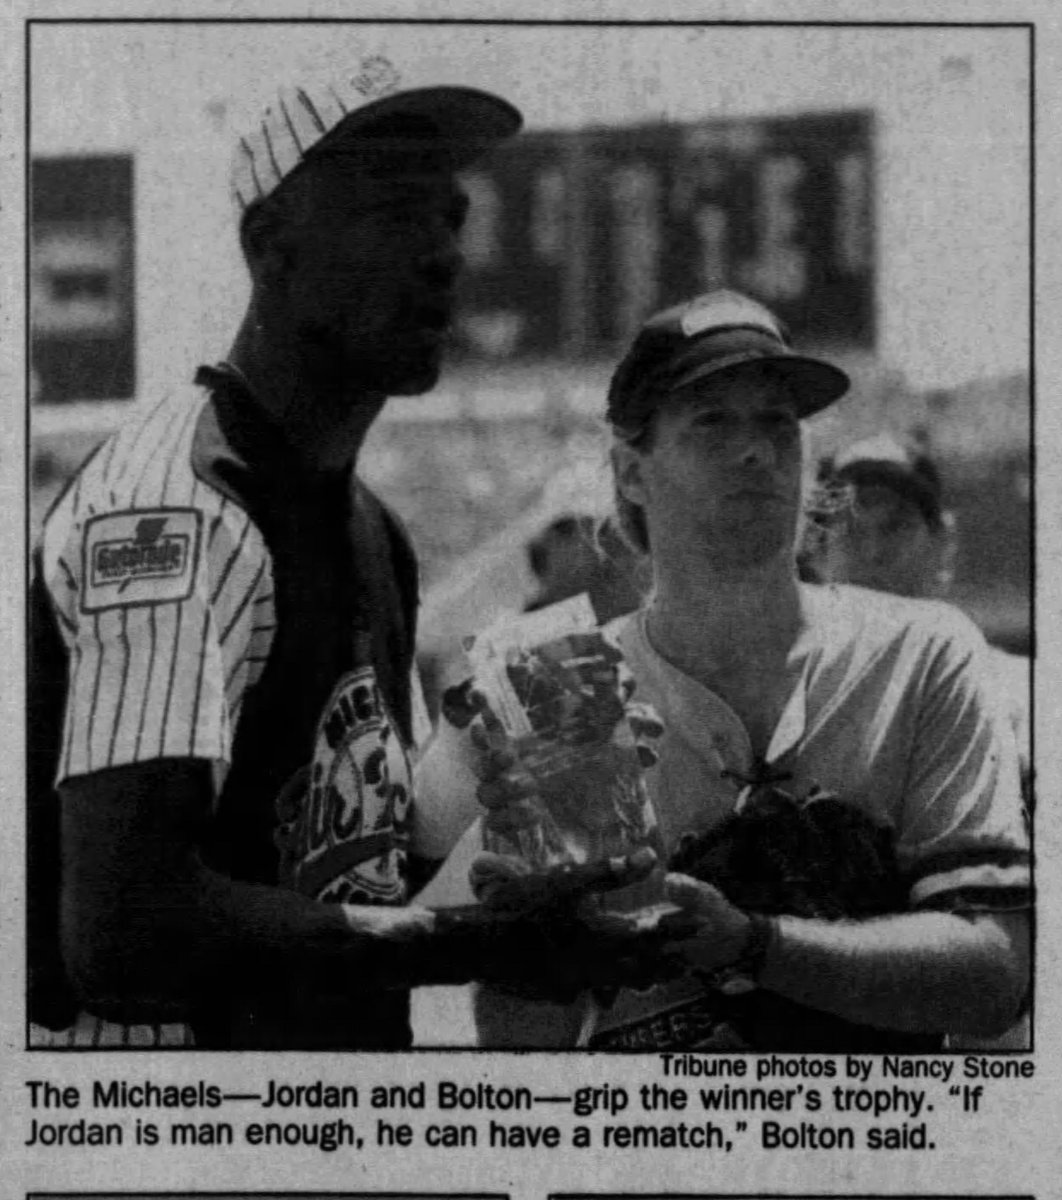 As the early 90s wore on, baseball chased golf as Jordan’s favorite non-hoops sport. On July 25, 1993, he co-hosted a 12-inch softball game at Comiskey prior to a Sox game. His team lost to Michael Bolton’s 7-1; he finished 1 for 3 with a single and a run scored.